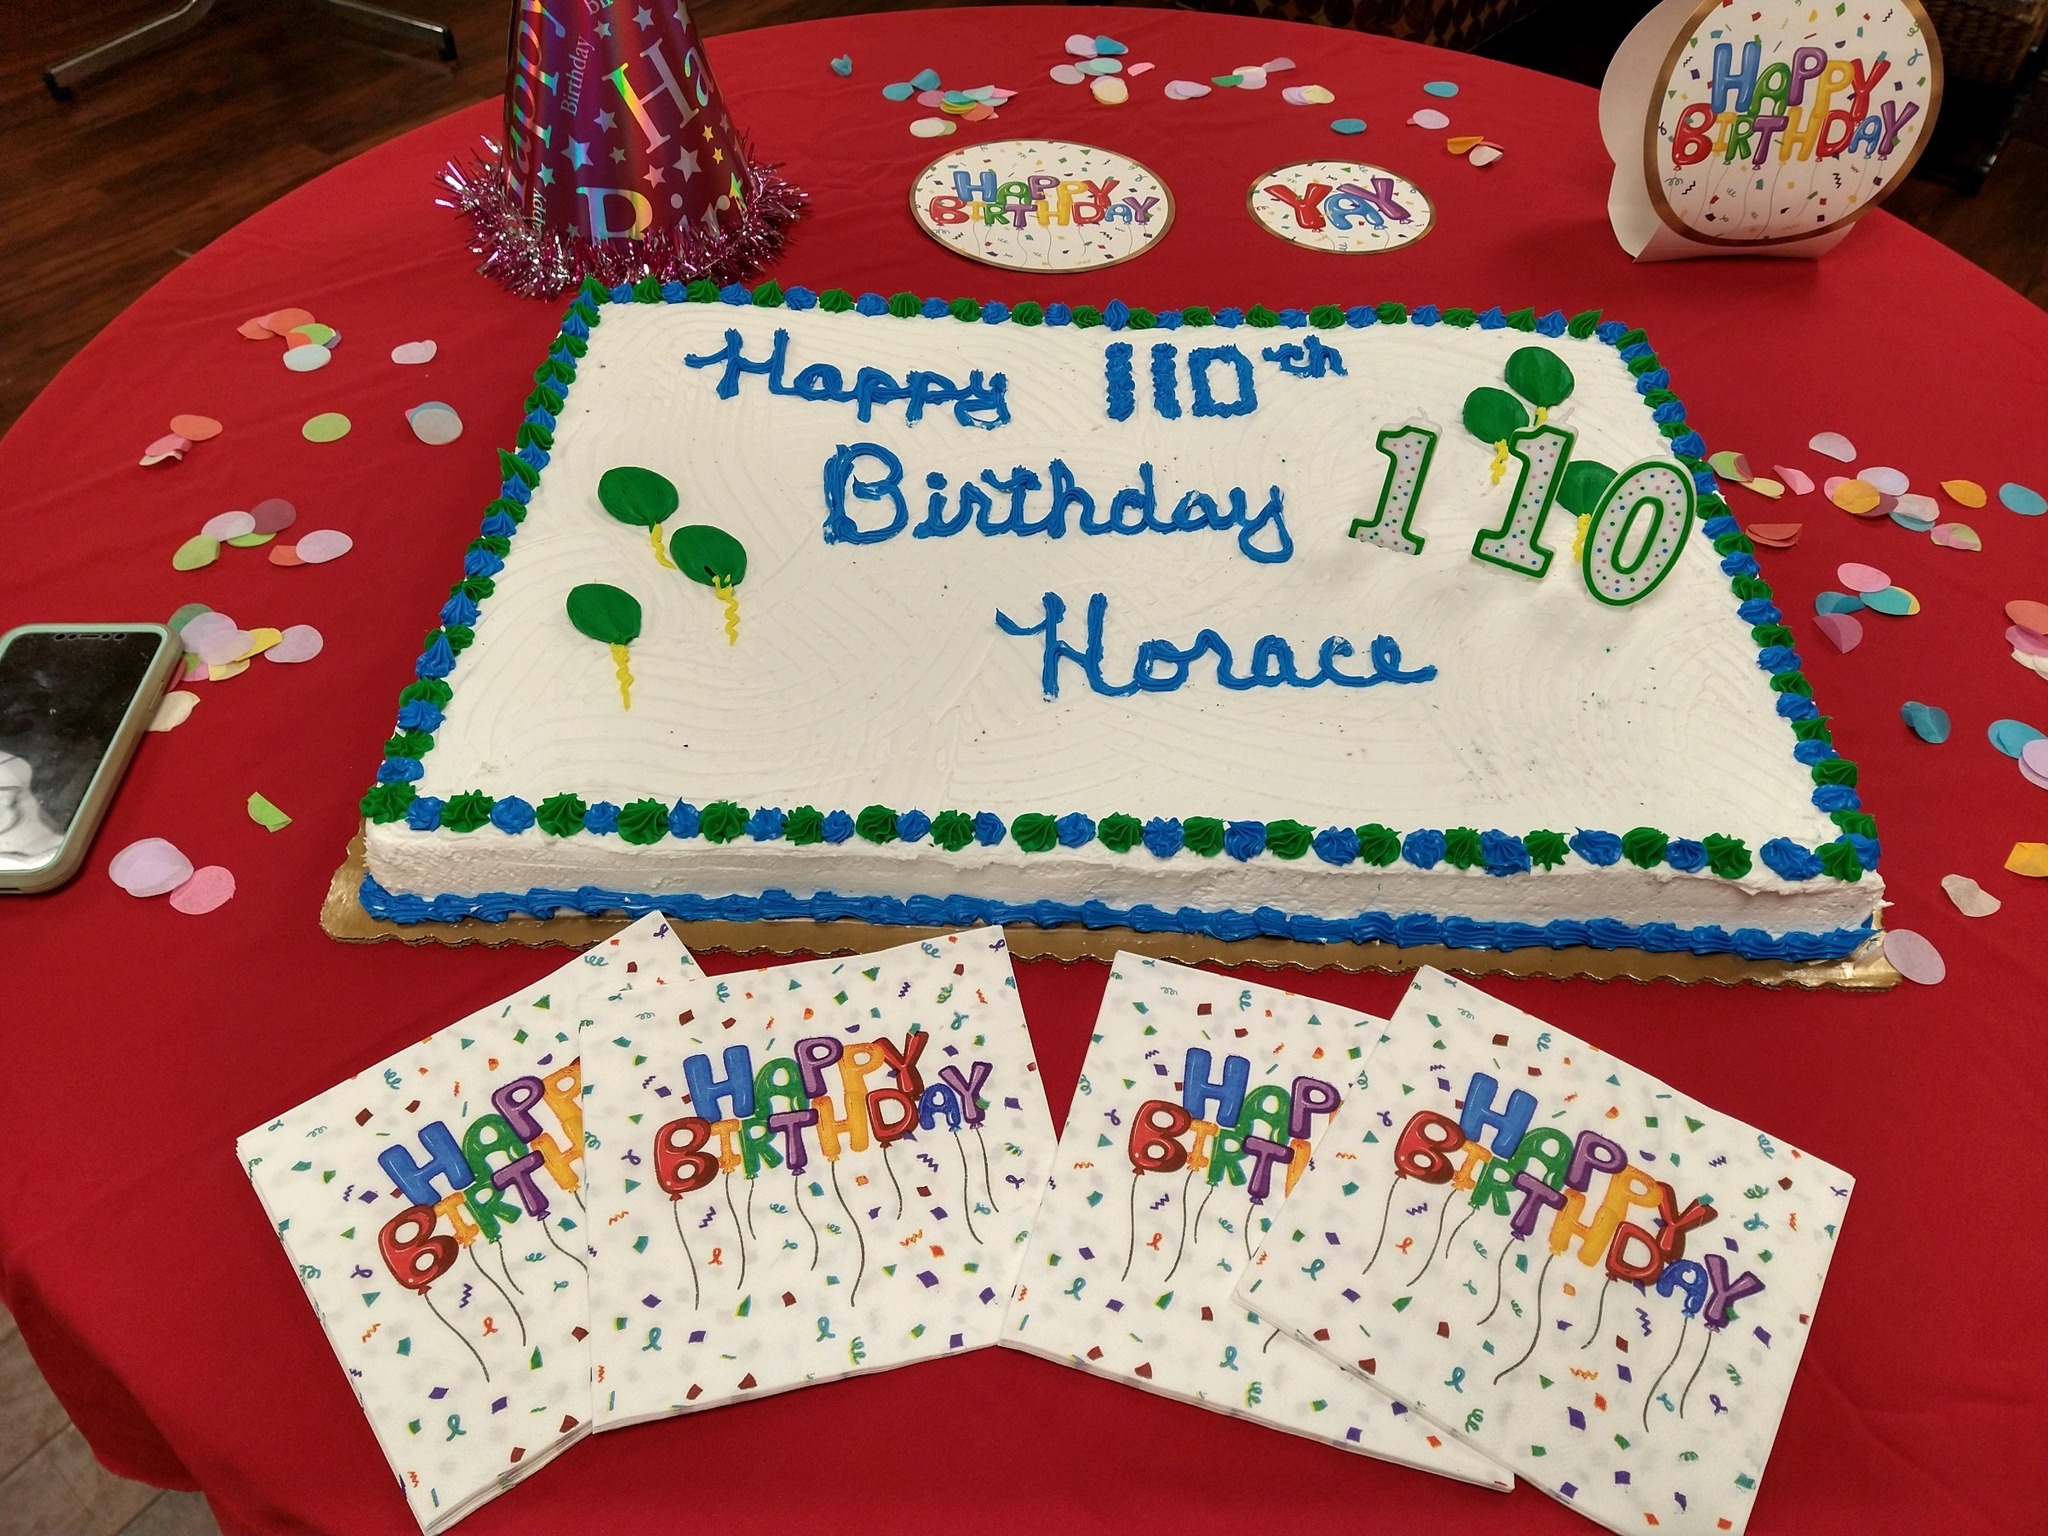 Horace Baumer, Pennsylvania’s Oldest Known Living Man, Turned 110